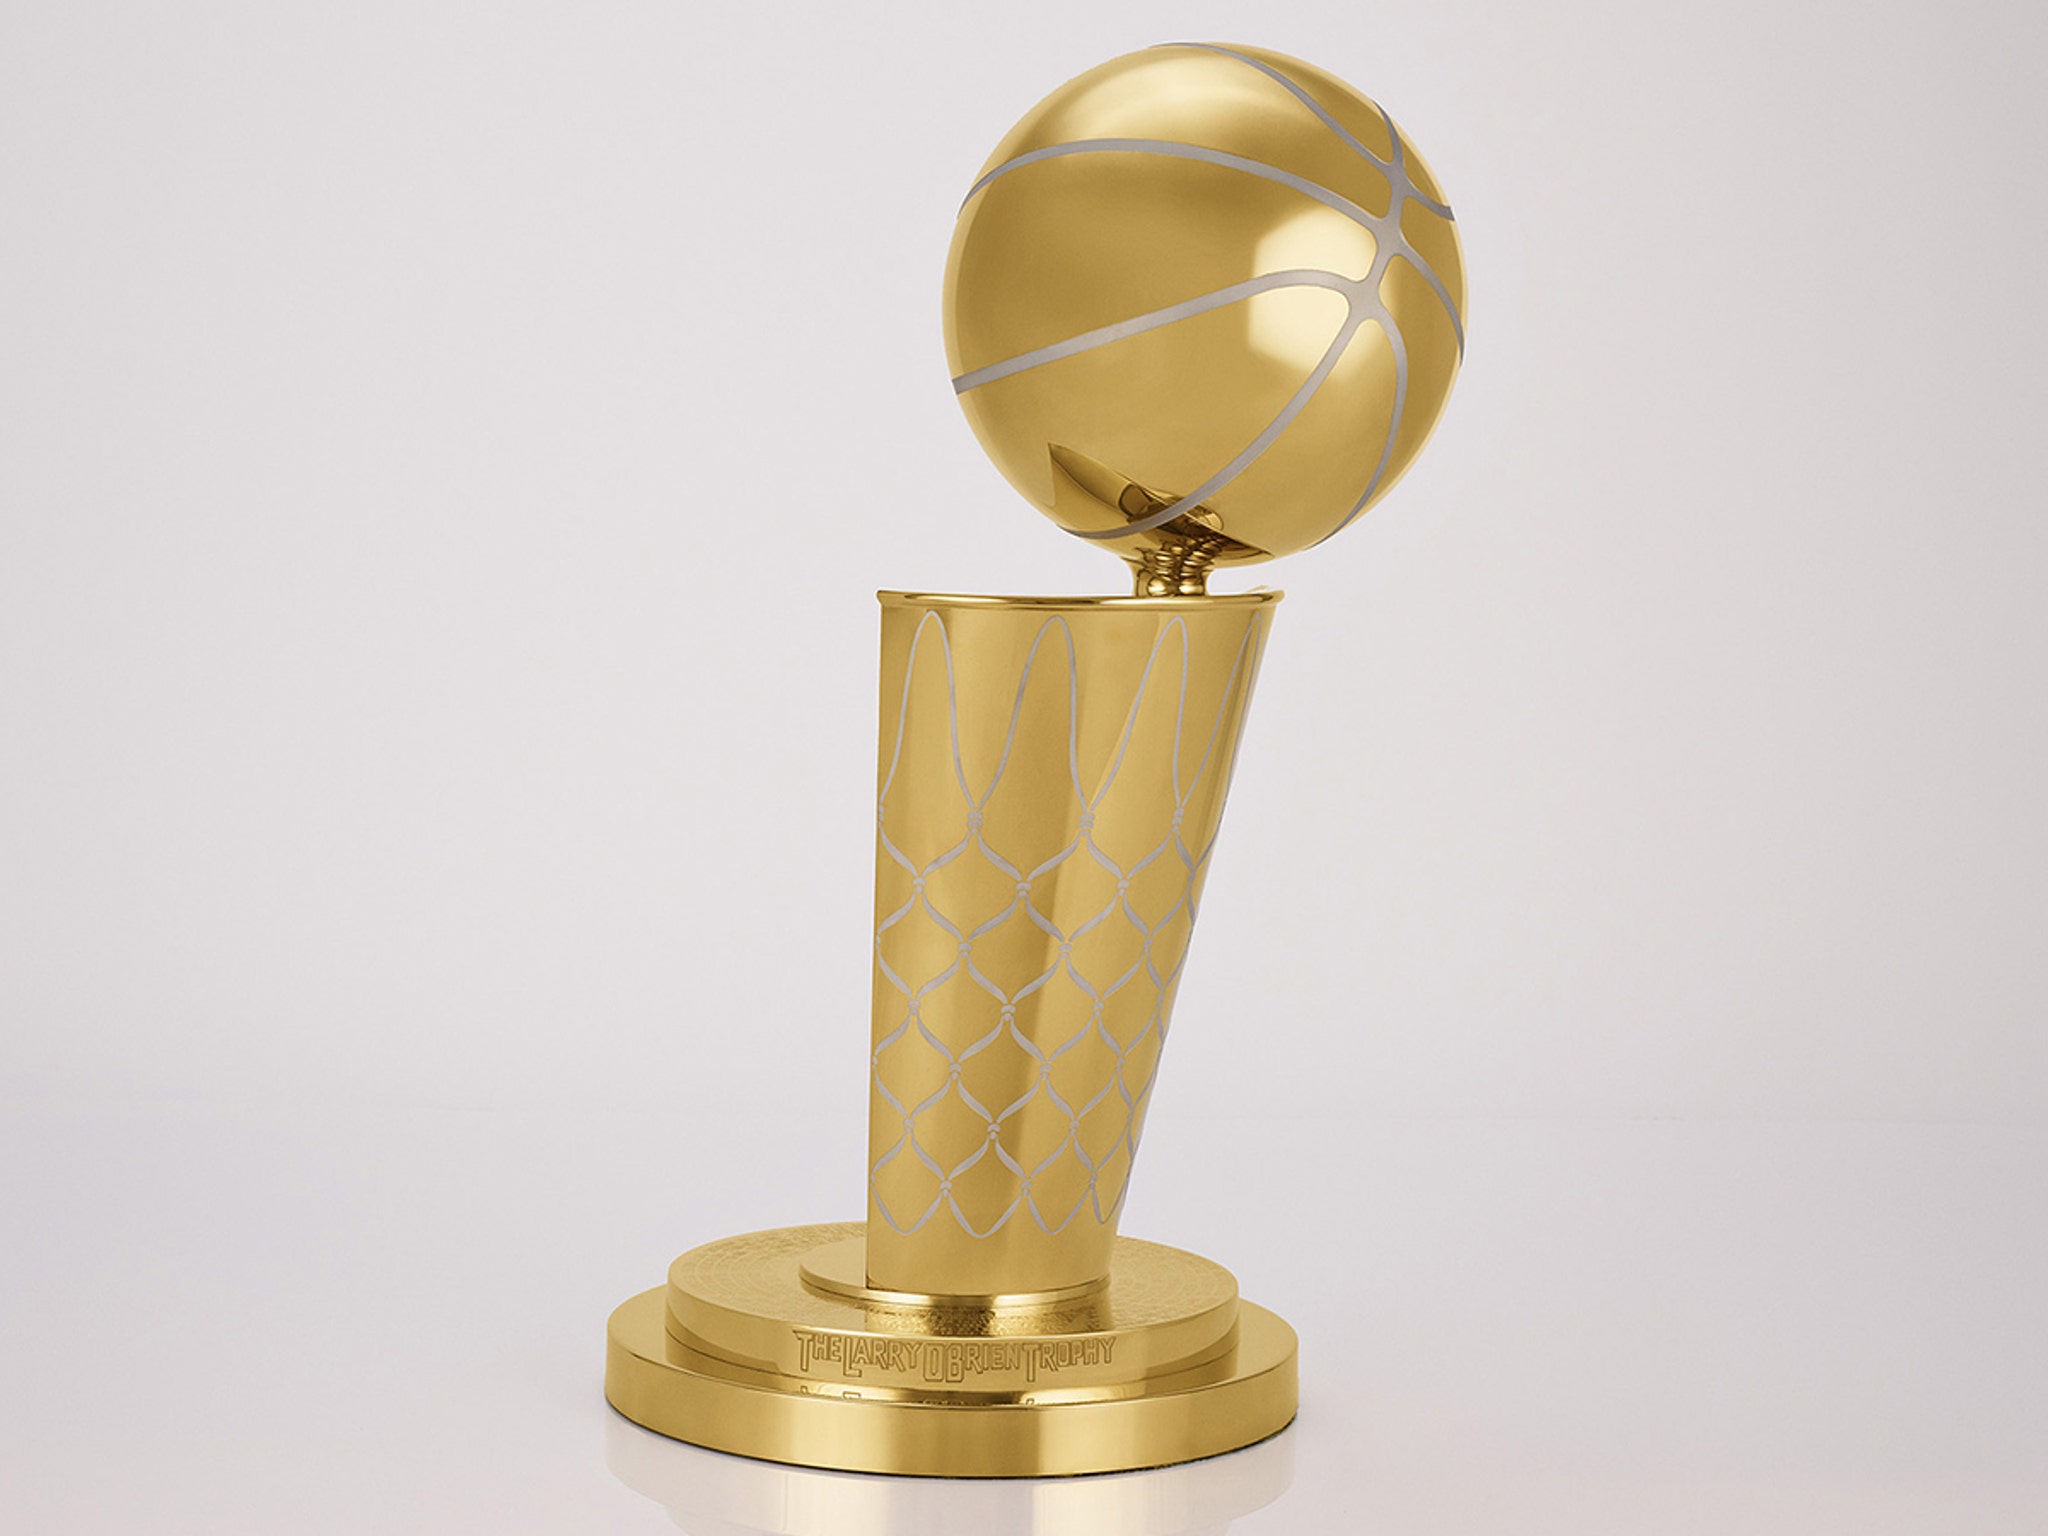 NBA unveils redesigned NBA Finals trophy, announces new conference